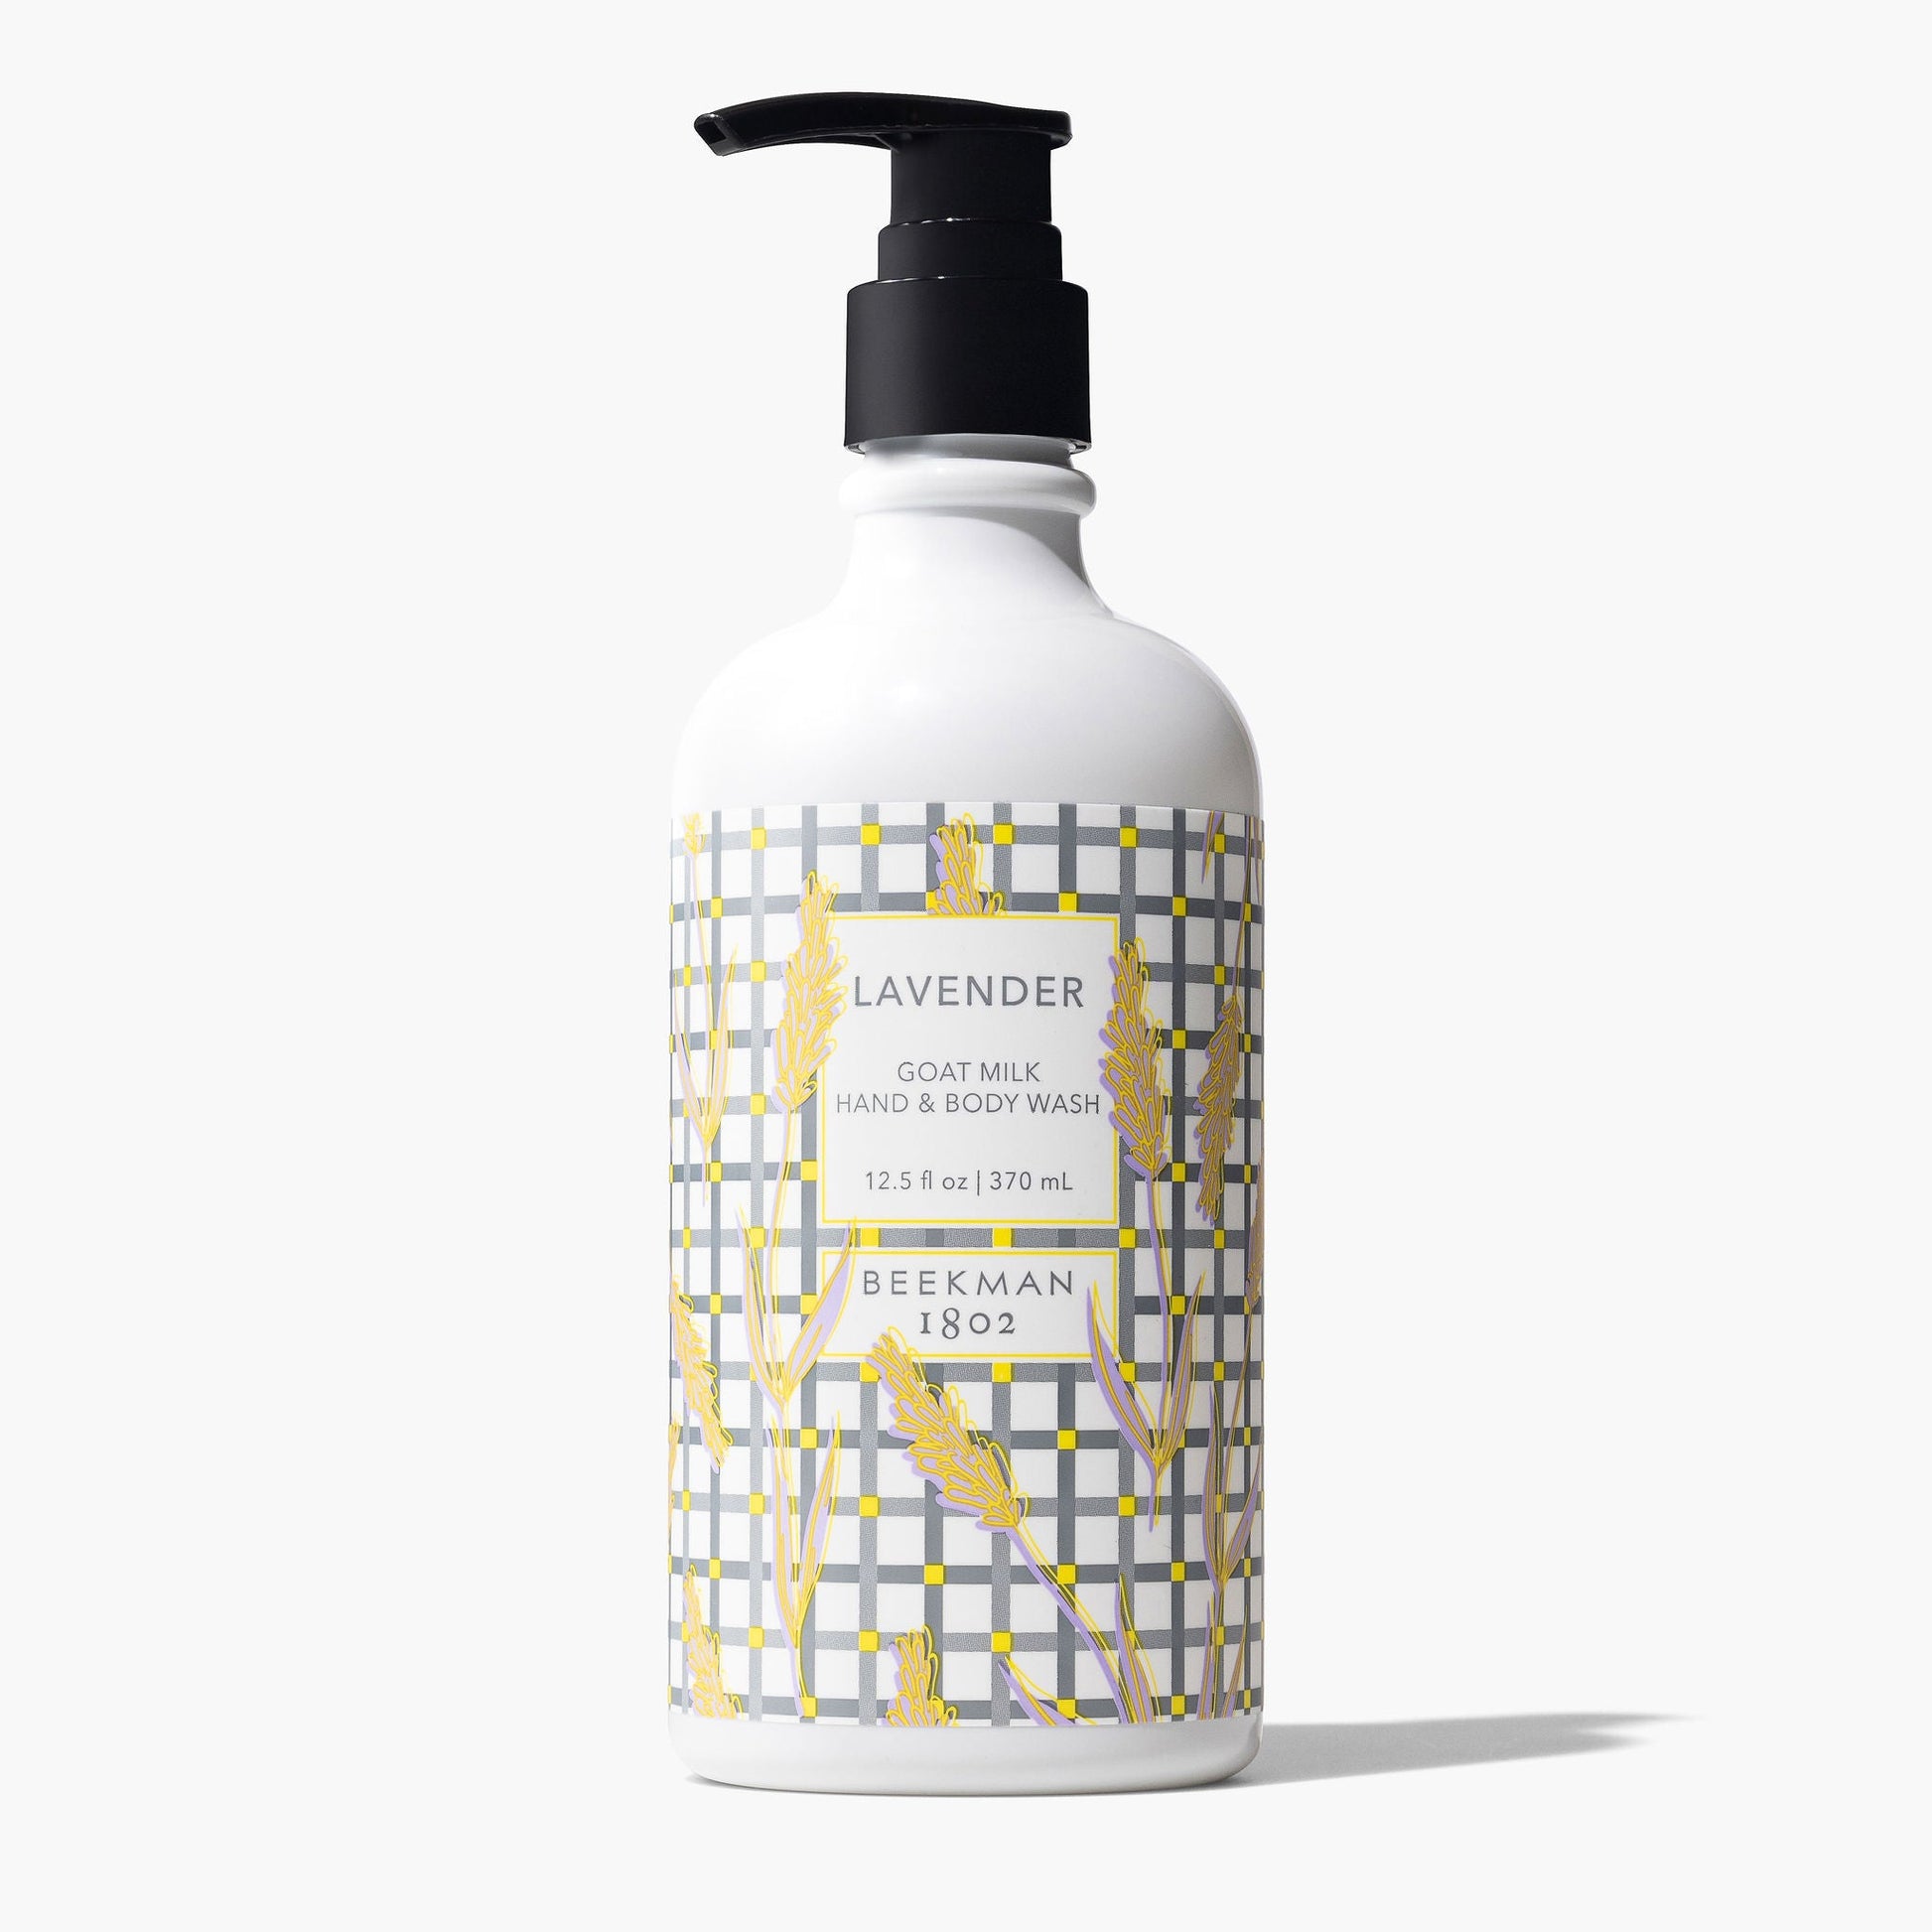 pump bottle of Lavender Goat Milk hand and body wash with a grey plaid and wheat stalk design printed label.